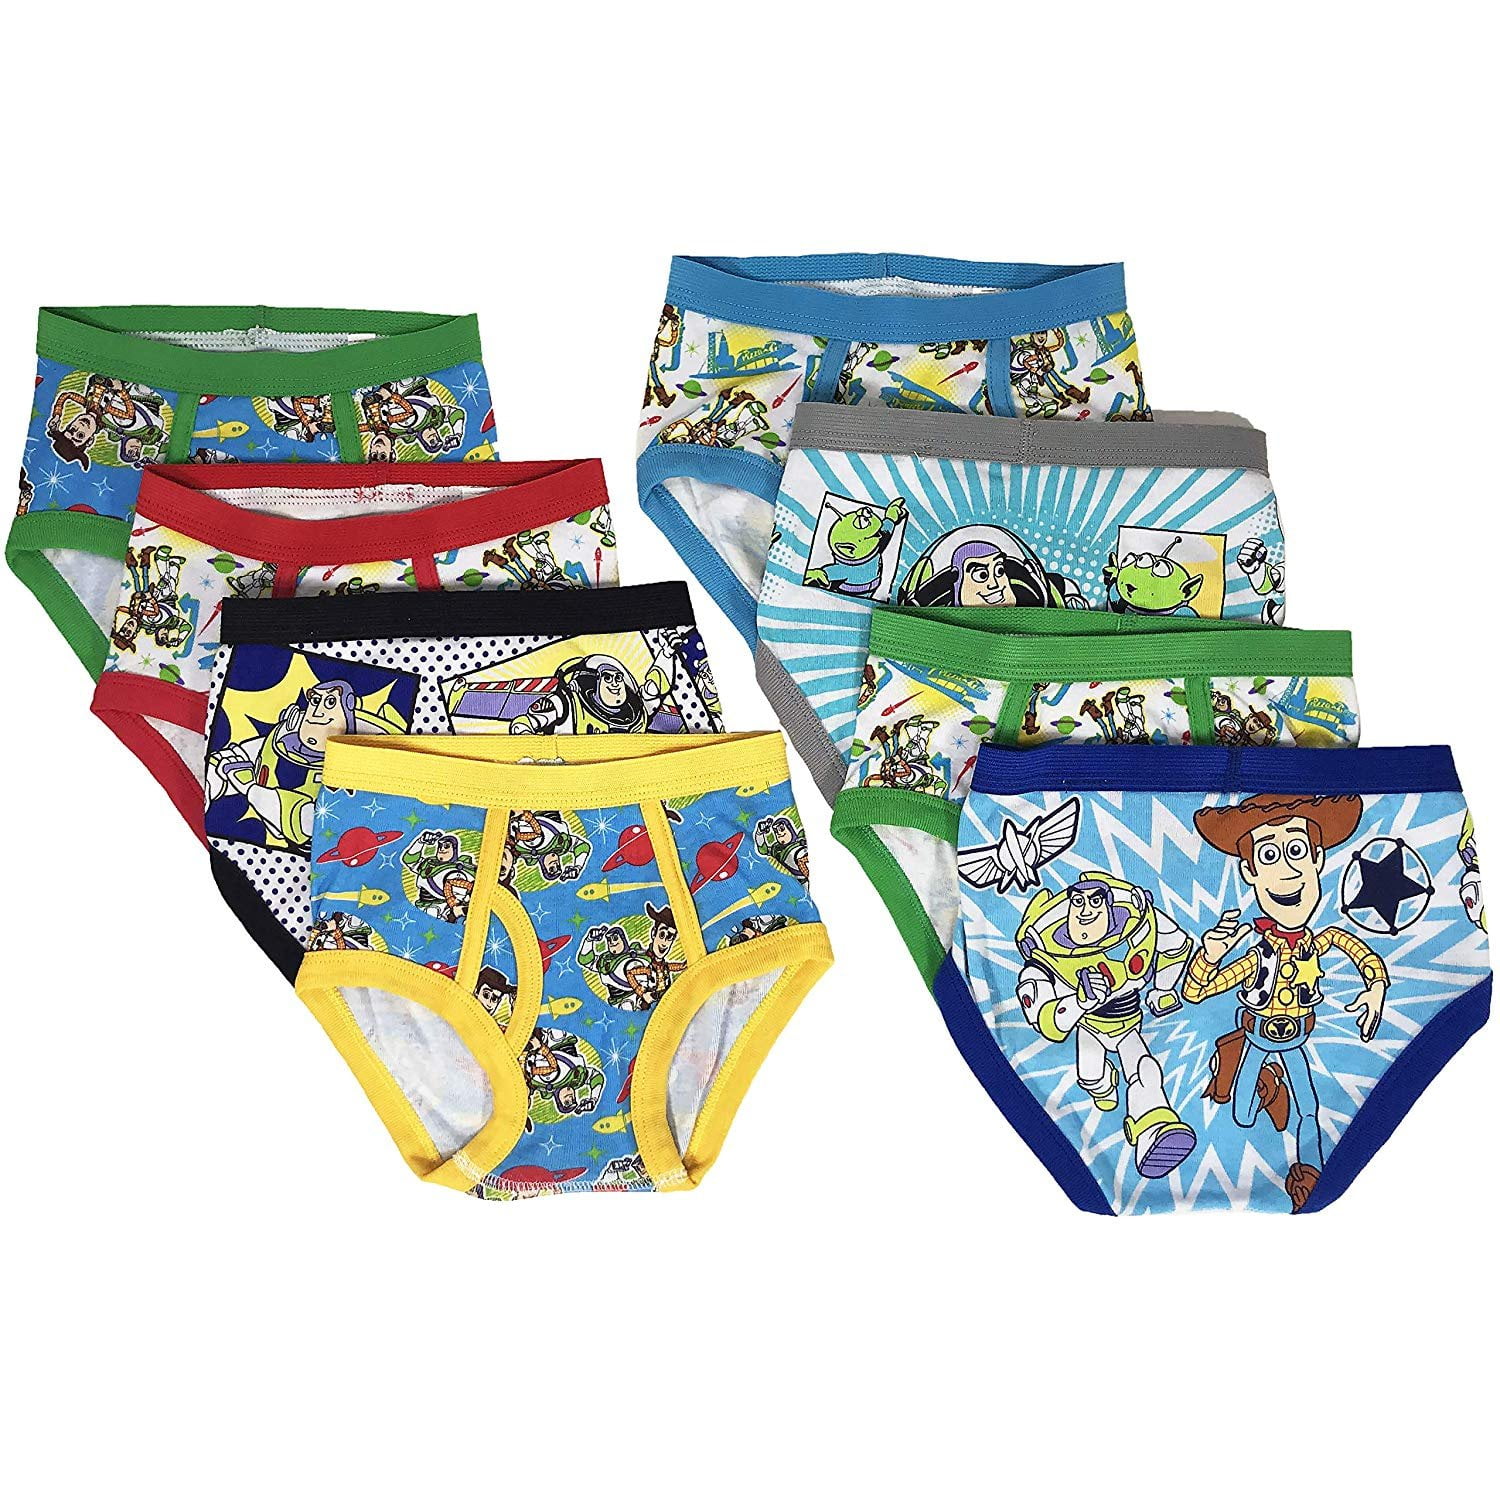 Official Boys Briefs Toy Story Pants Underwear 3-7 Years 